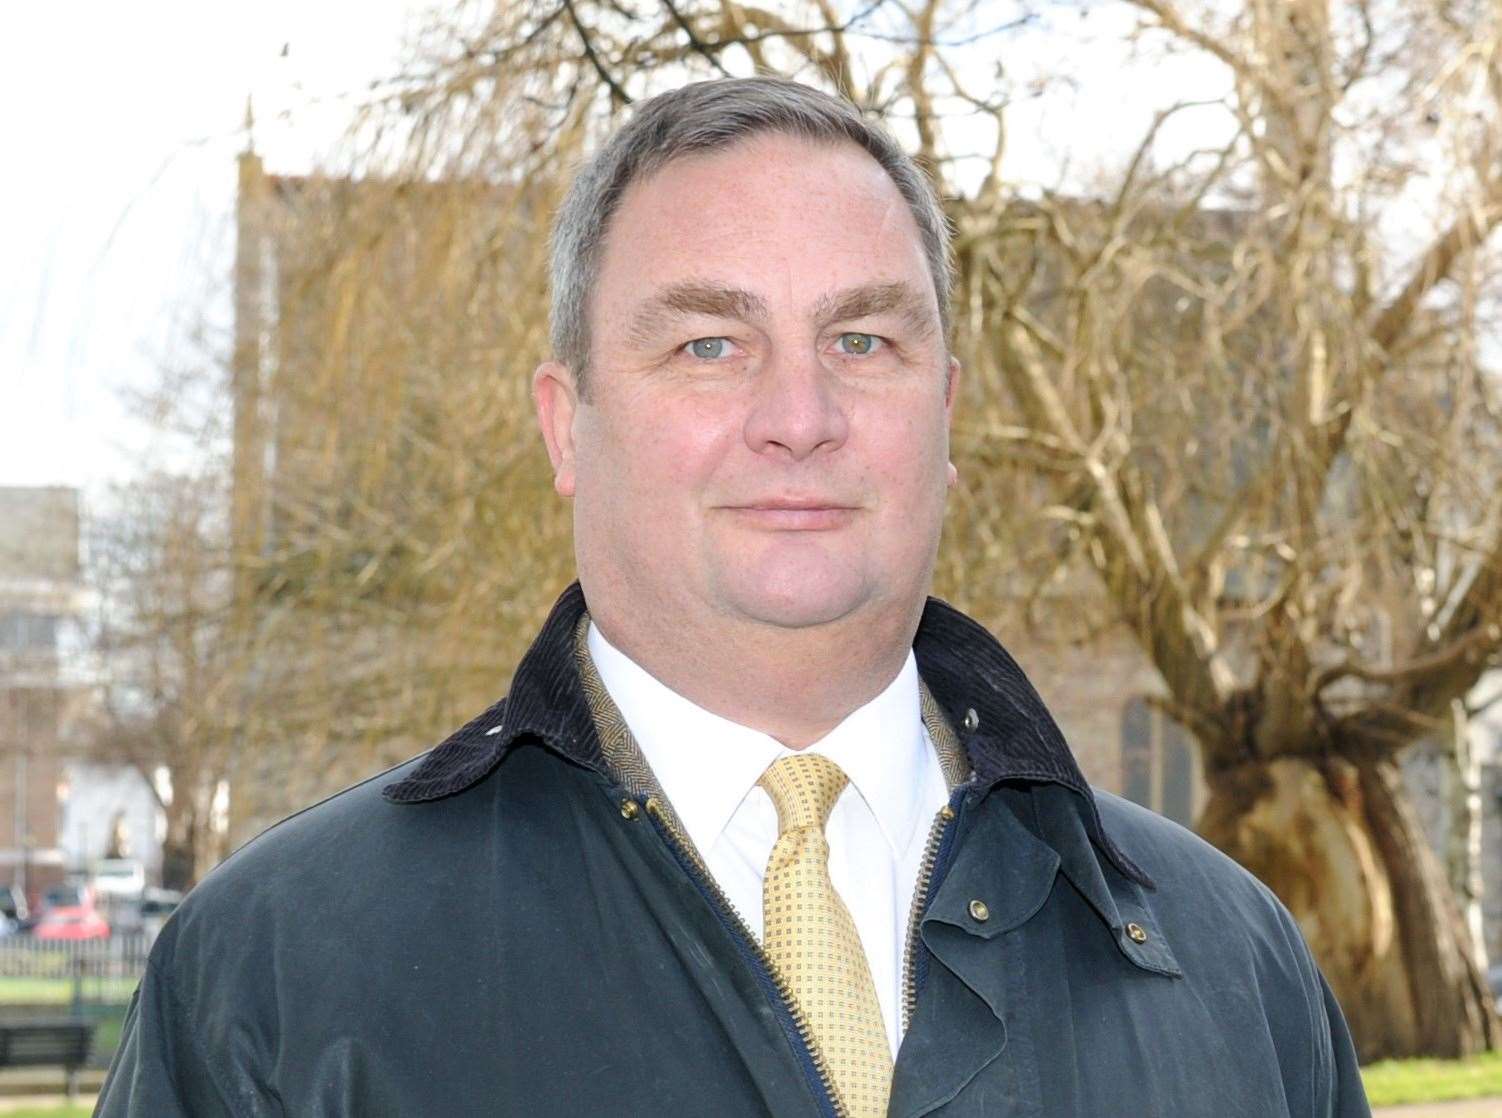 Cllr John Burden has urged people to follow the rules